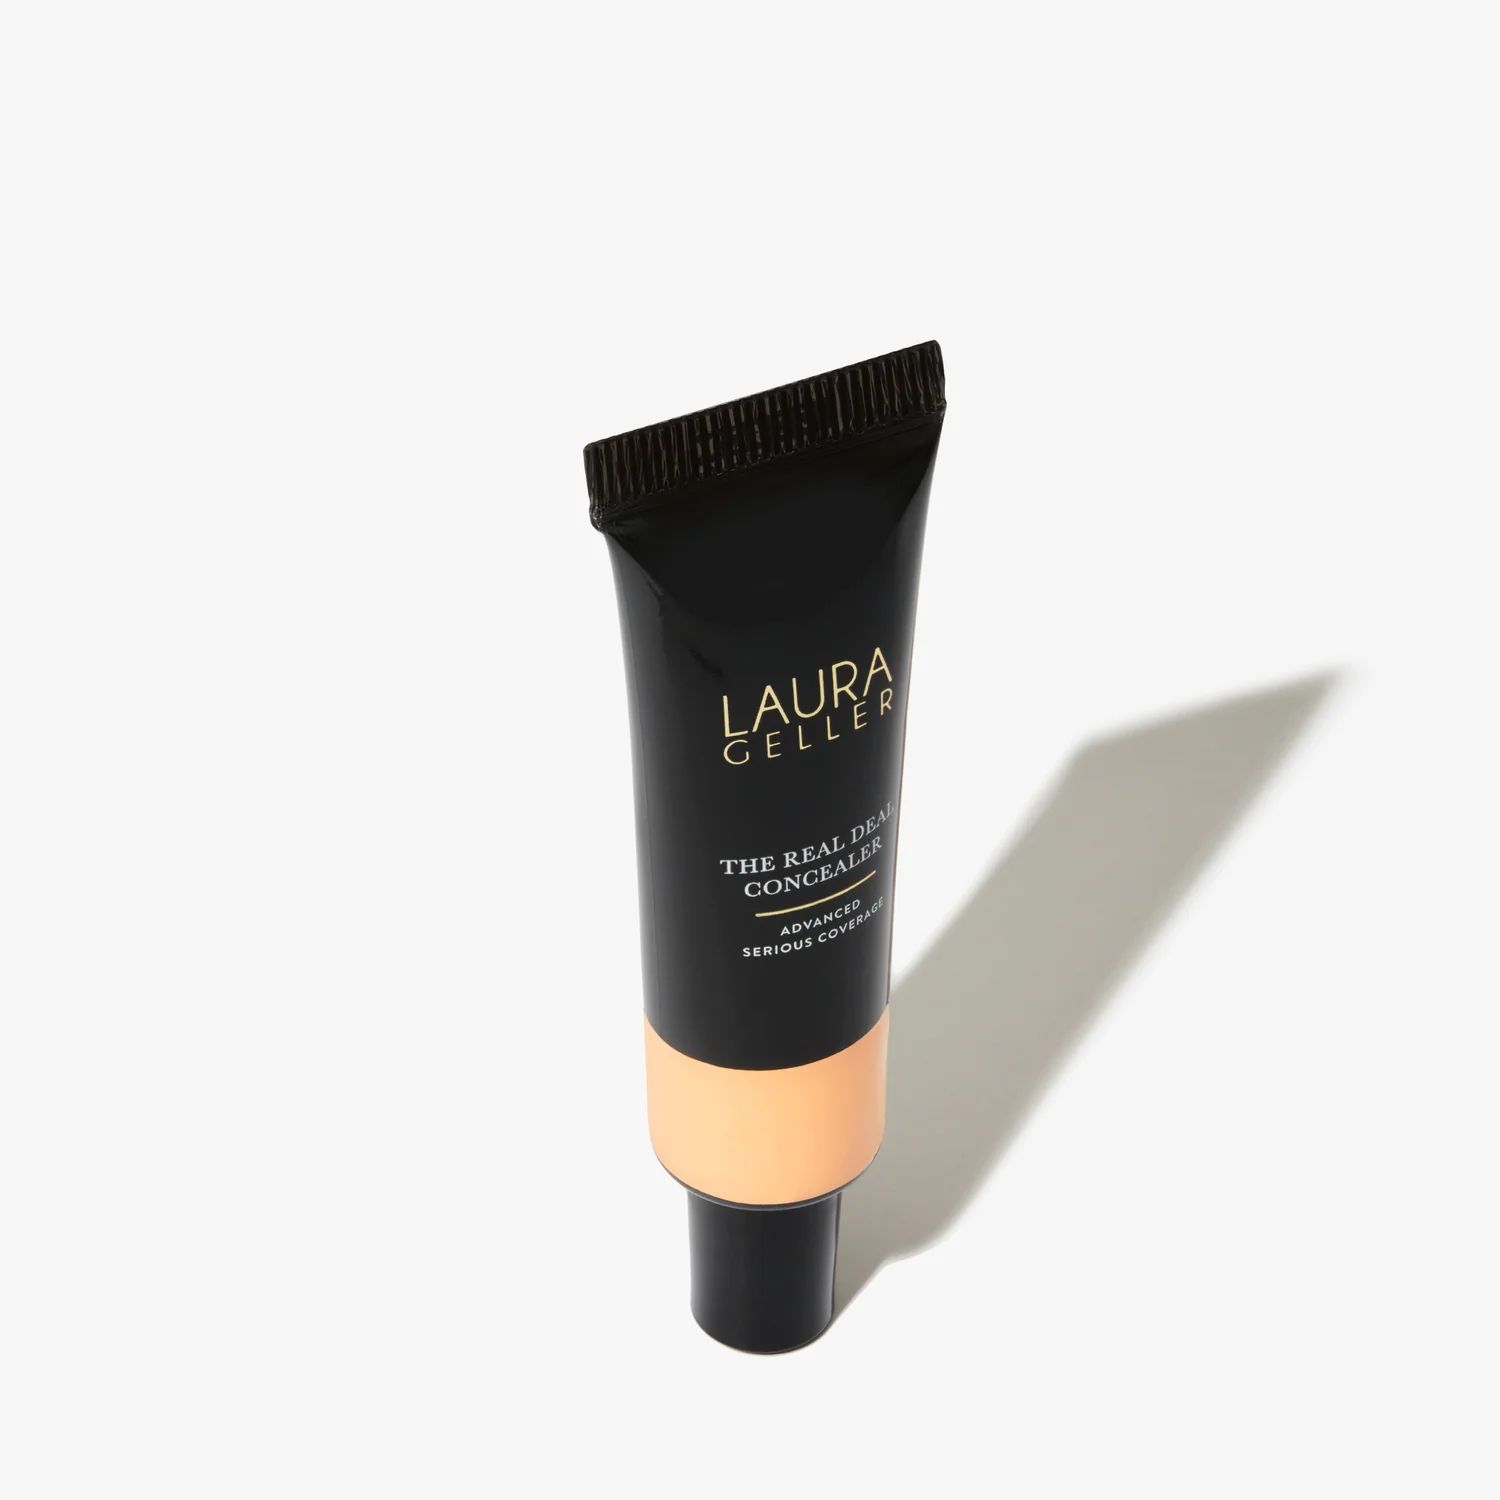 The Real Deal Concealer Advanced Serious Coverage | Laura Geller